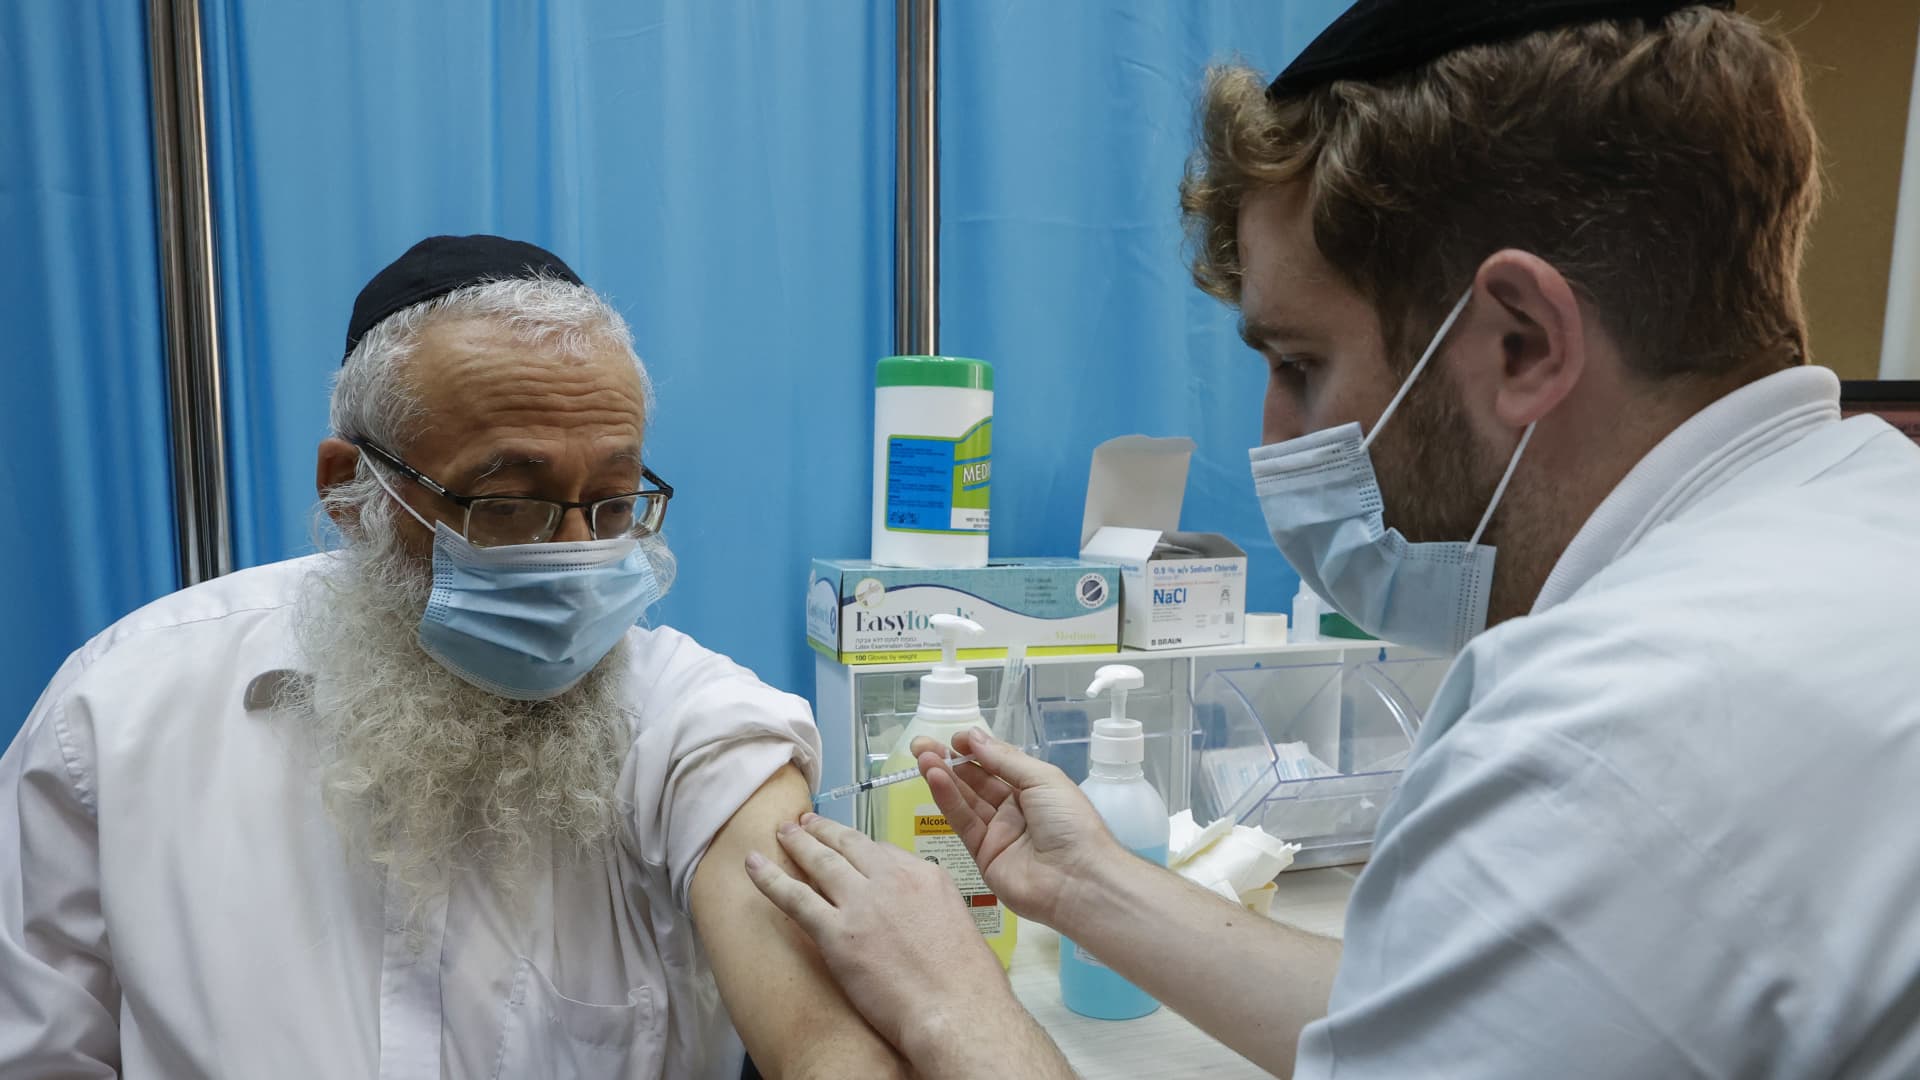 A healthcare worker administers a Covid-19 vaccine at Clalit Health Services, in the ultra-Orthodox Israeli city of Bnei Brak, on January 6, 2021.